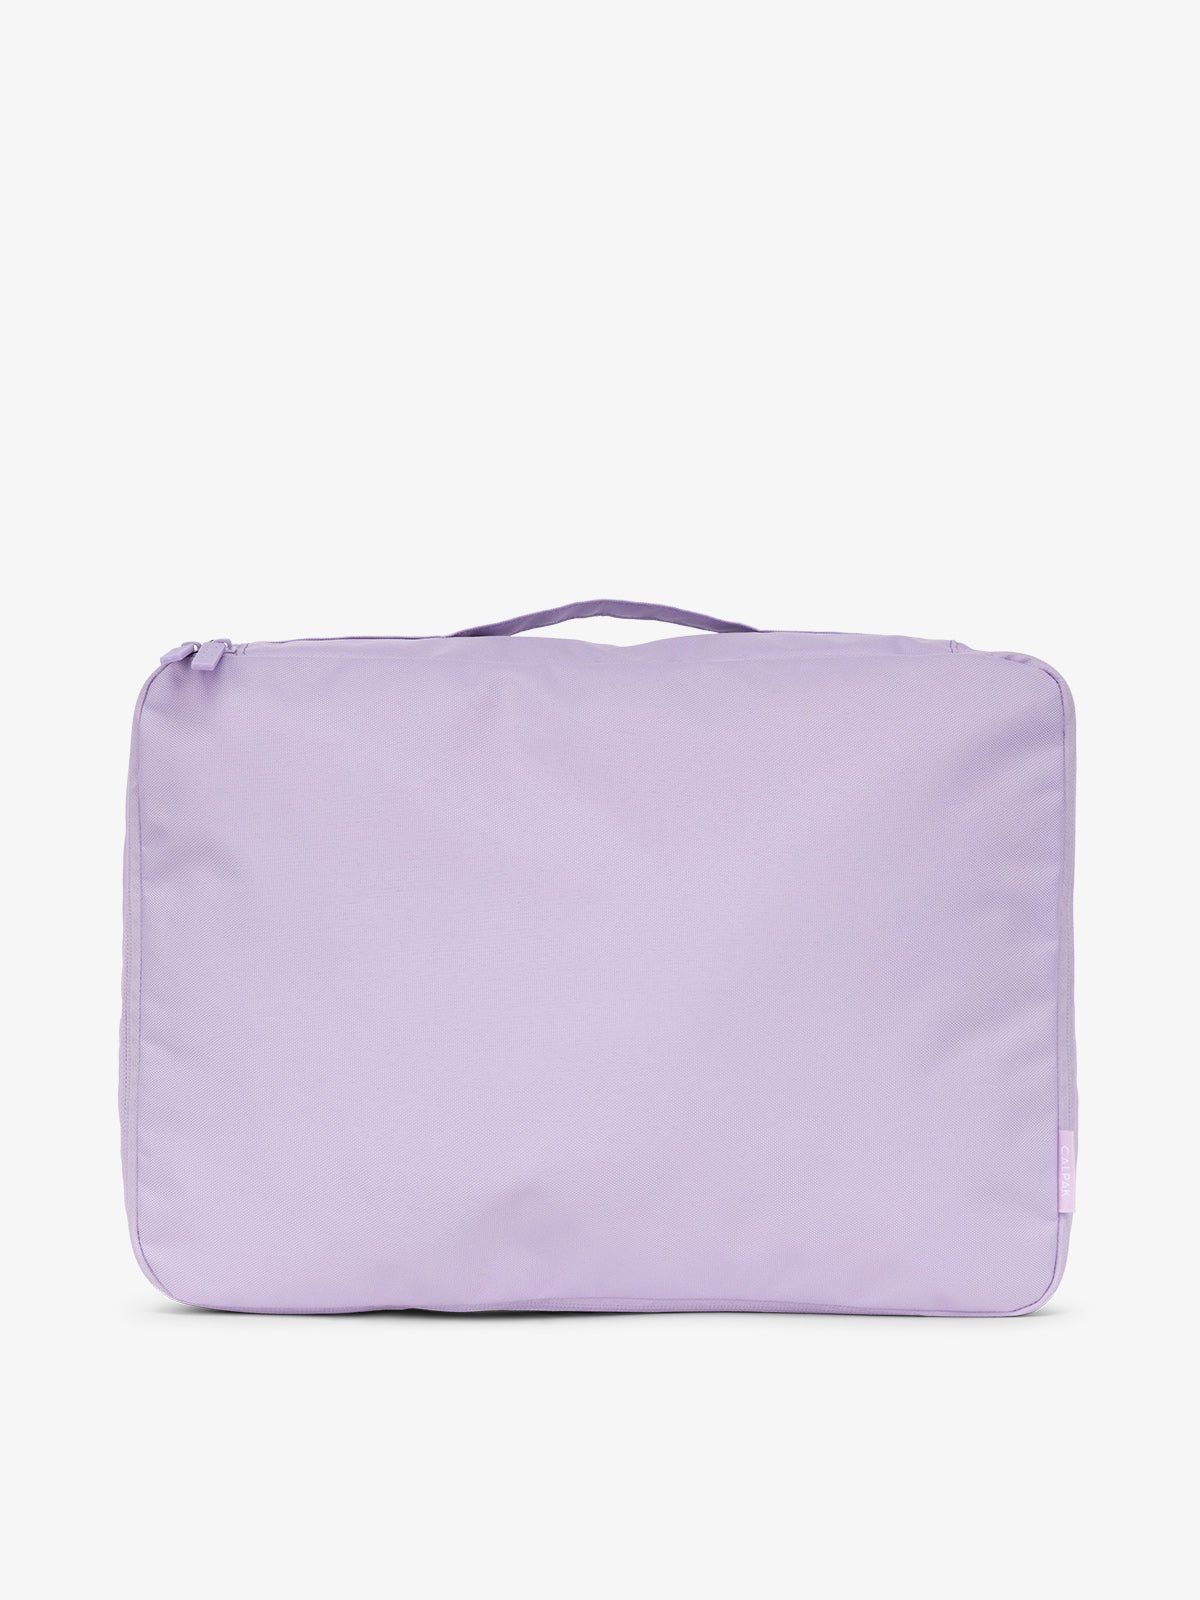 CALPAK large packing cubes with top handle in light purple